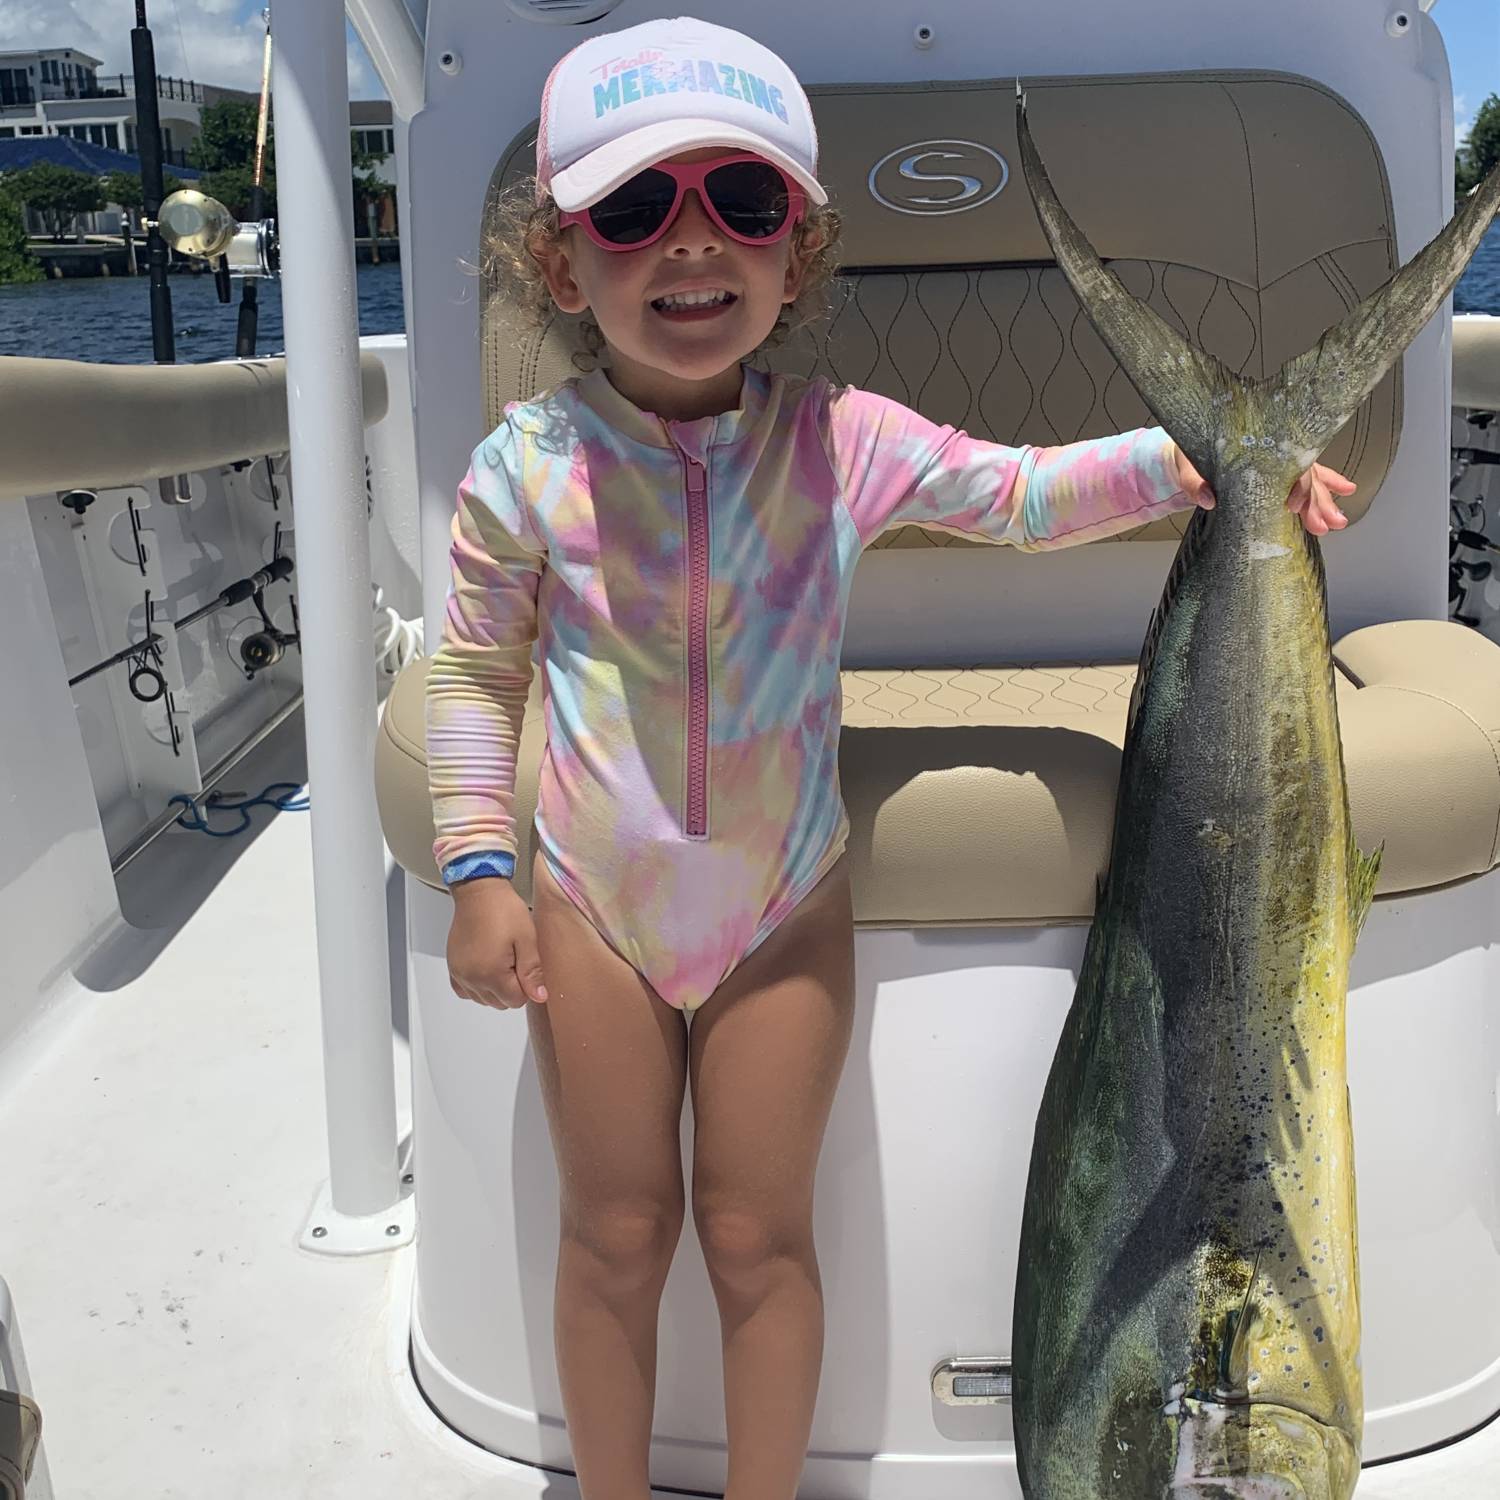 Title: Chloe’s big mahi - On board their Sportsman Open 232 Center Console - Location: Boca raton Florida. Participating in the Photo Contest #SportsmanSeptember2021